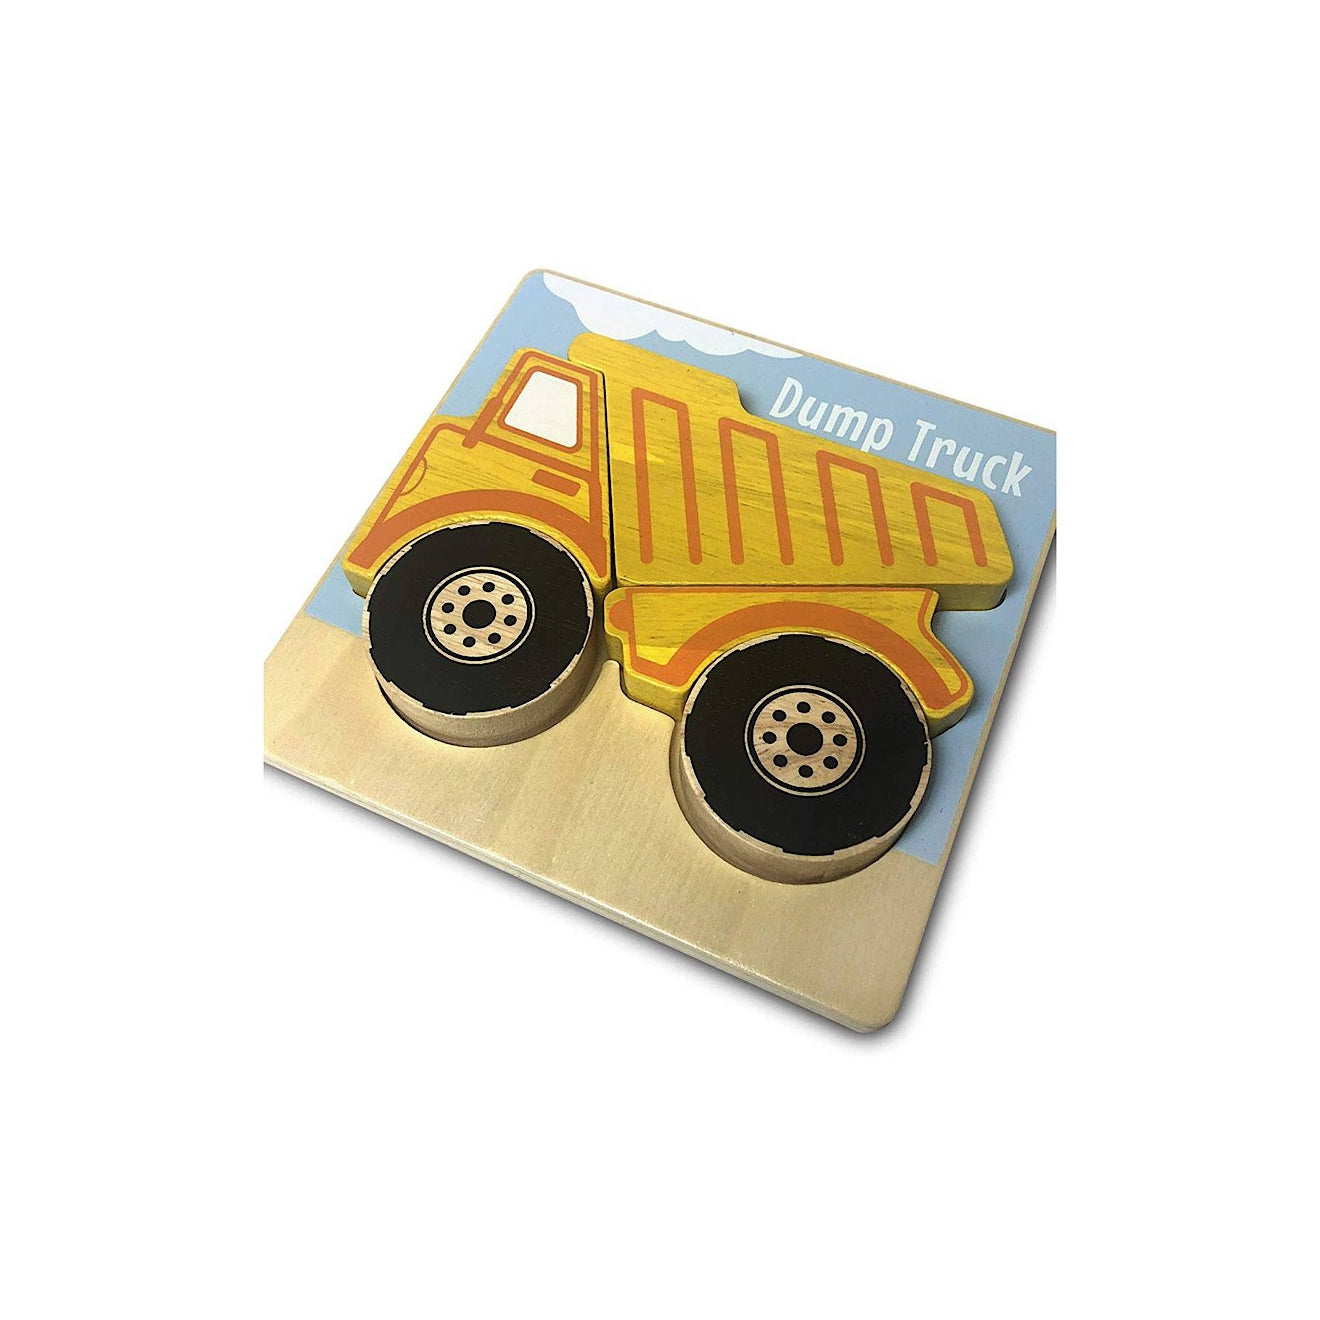 Wooden Vehicle Puzzles